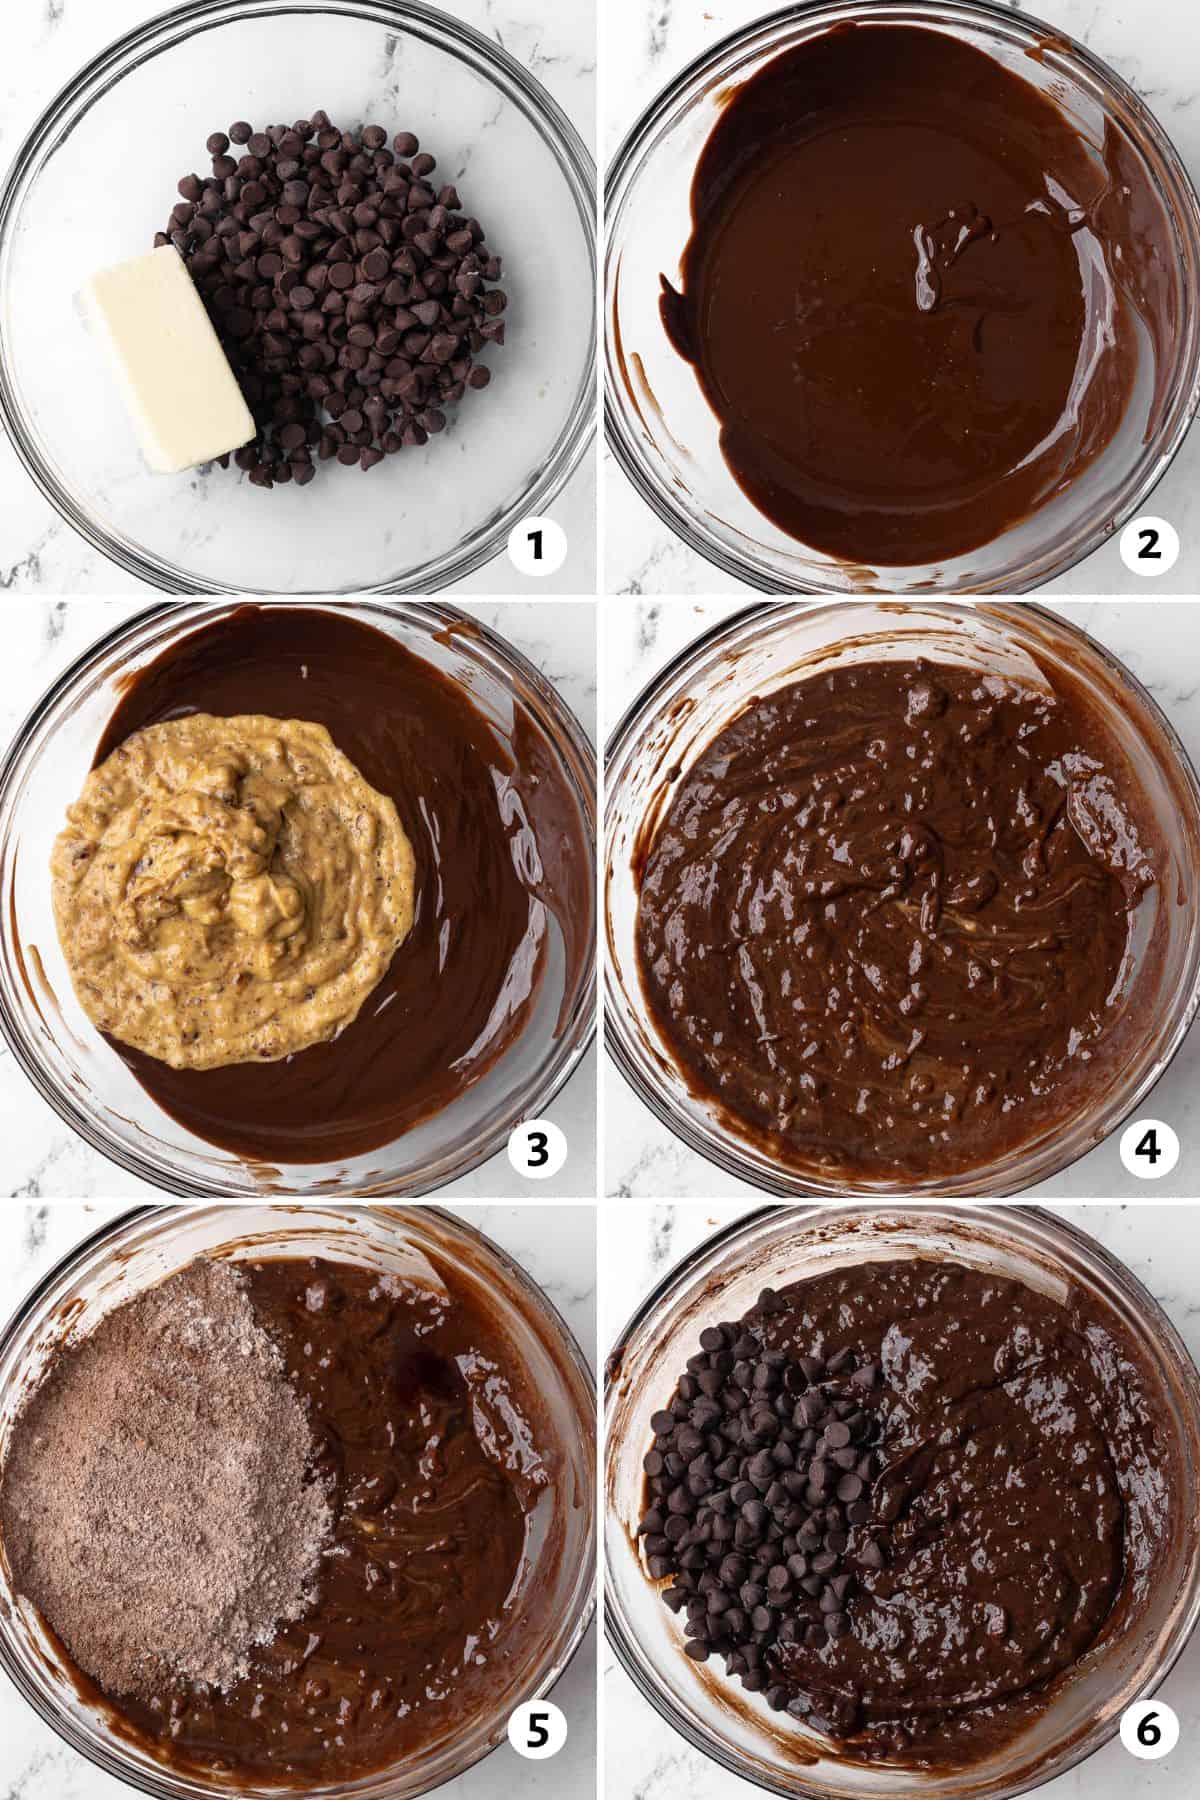 6 image collage making recipe in a bowl: 1- chocolate chips and butter in bowl, 2- after melting, 3- date mixture added, 4- chocolate and date mixture combined, 5- dry ingredients added, 6- chocolate chips added.